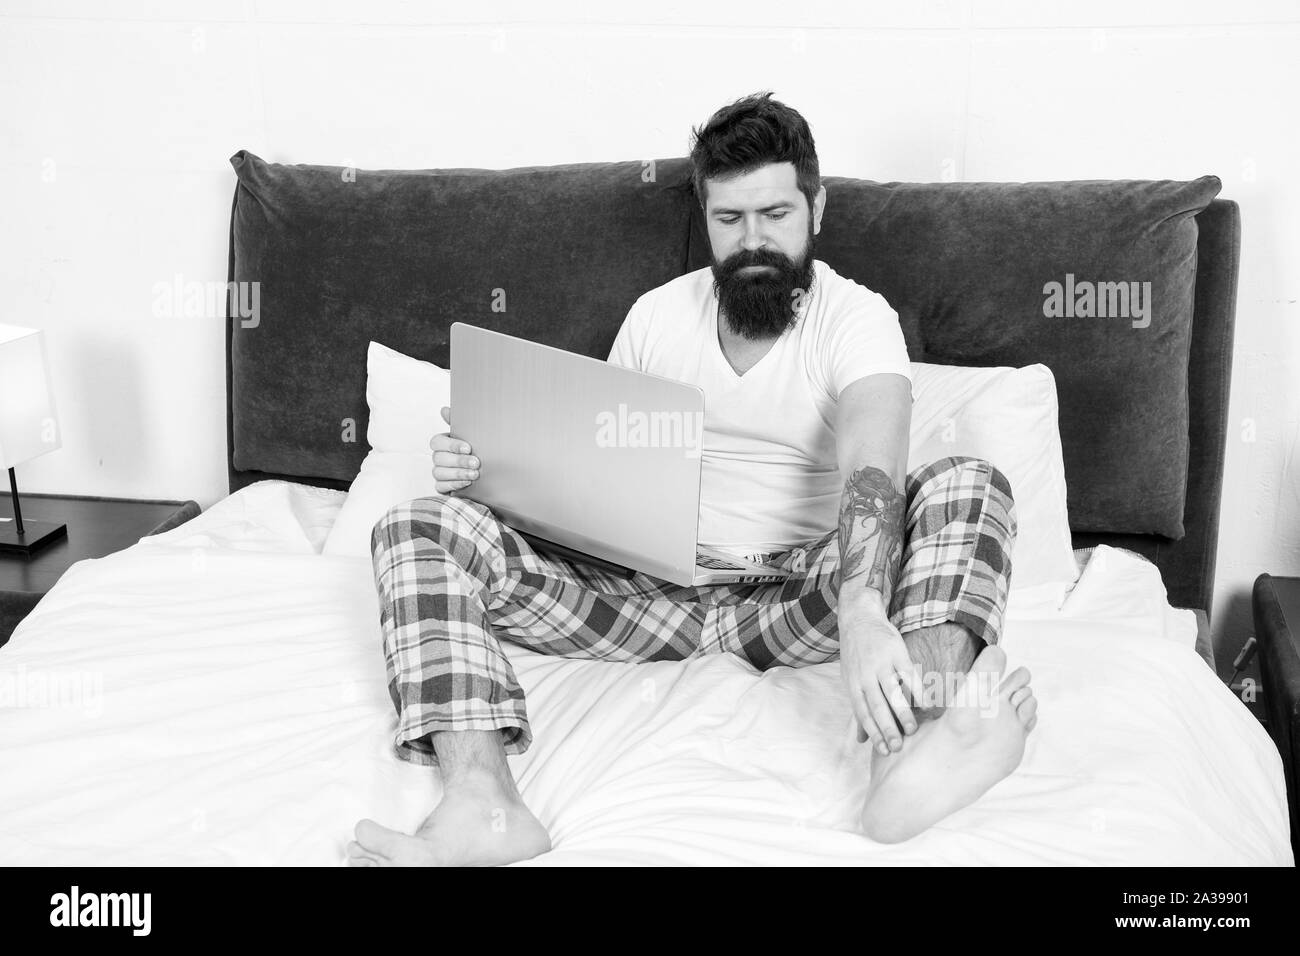 Man surfing internet or working online. Hipster bearded guy pajamas freelance worker. Remote work concept. Online life. Social networks internet addiction. Online shopping. Whole world in his laptop. Stock Photo